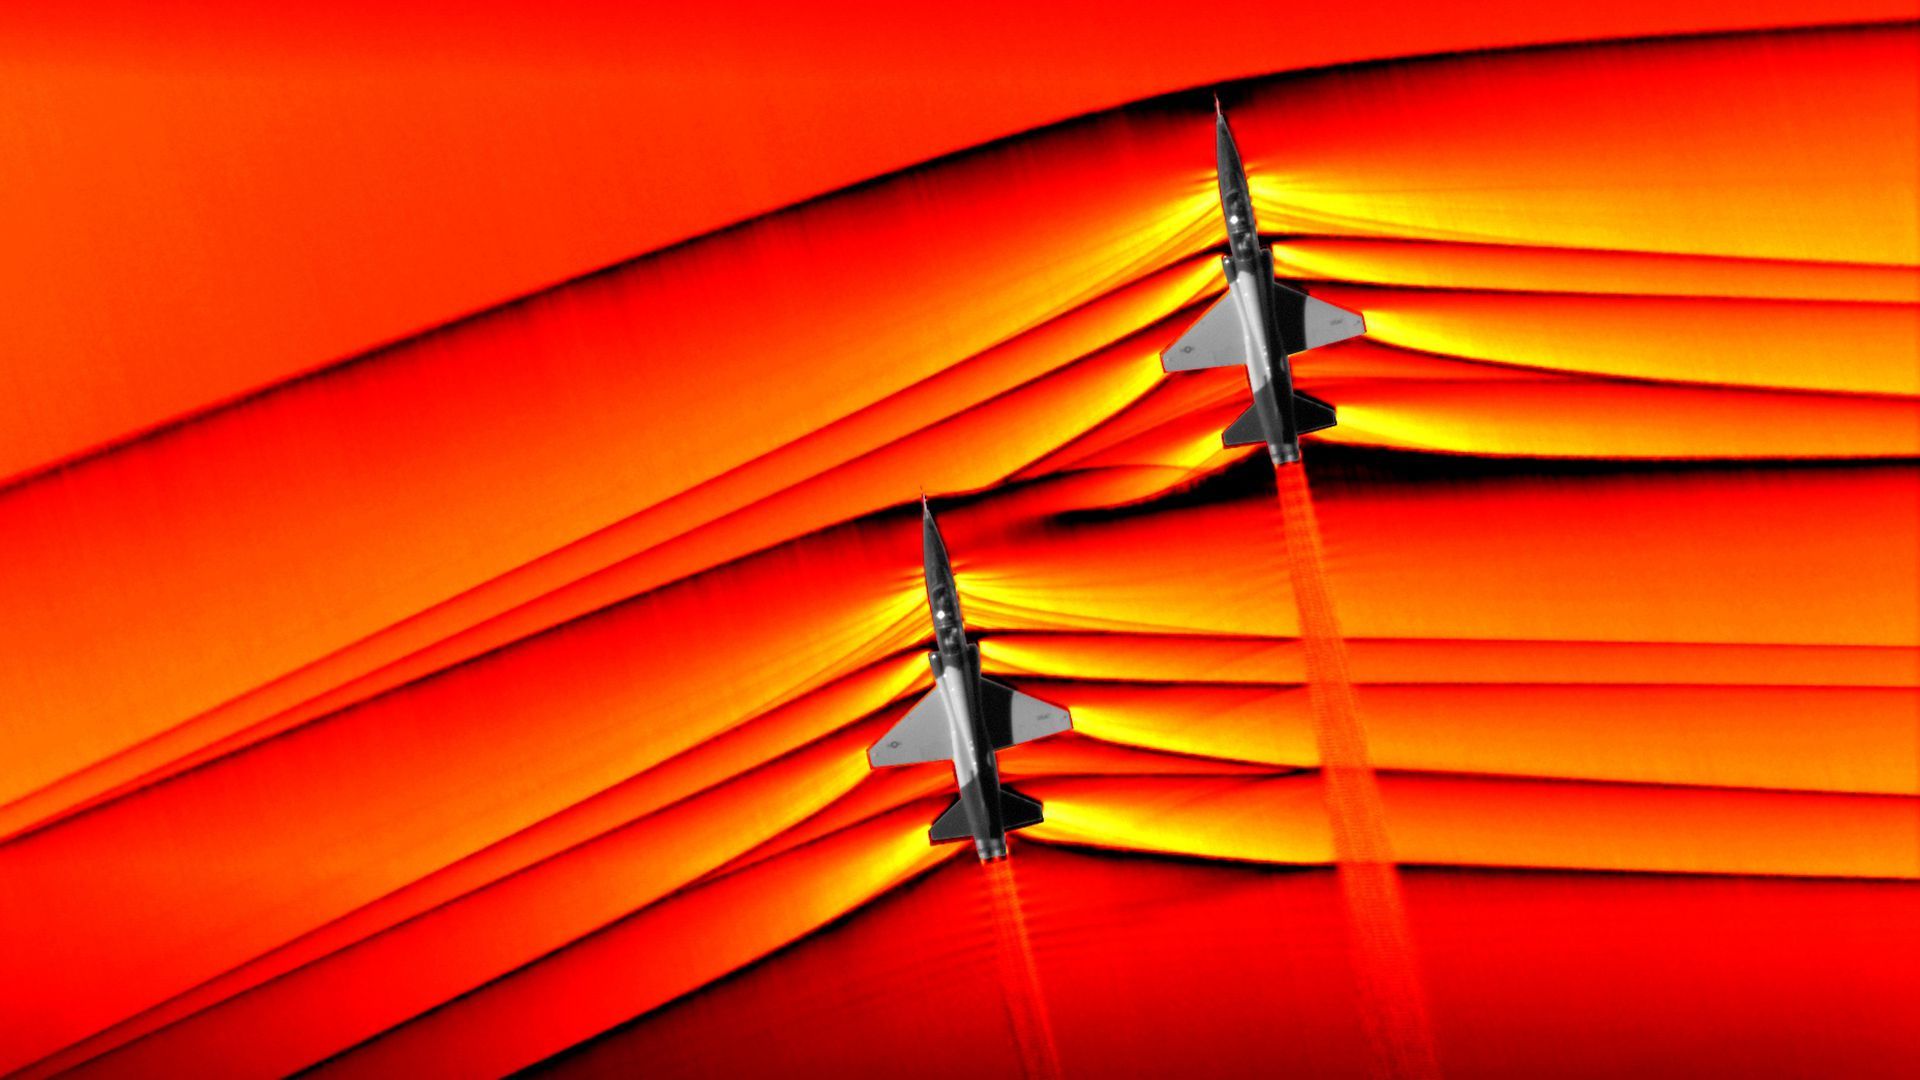 Airplanes breaking the sound barrier.